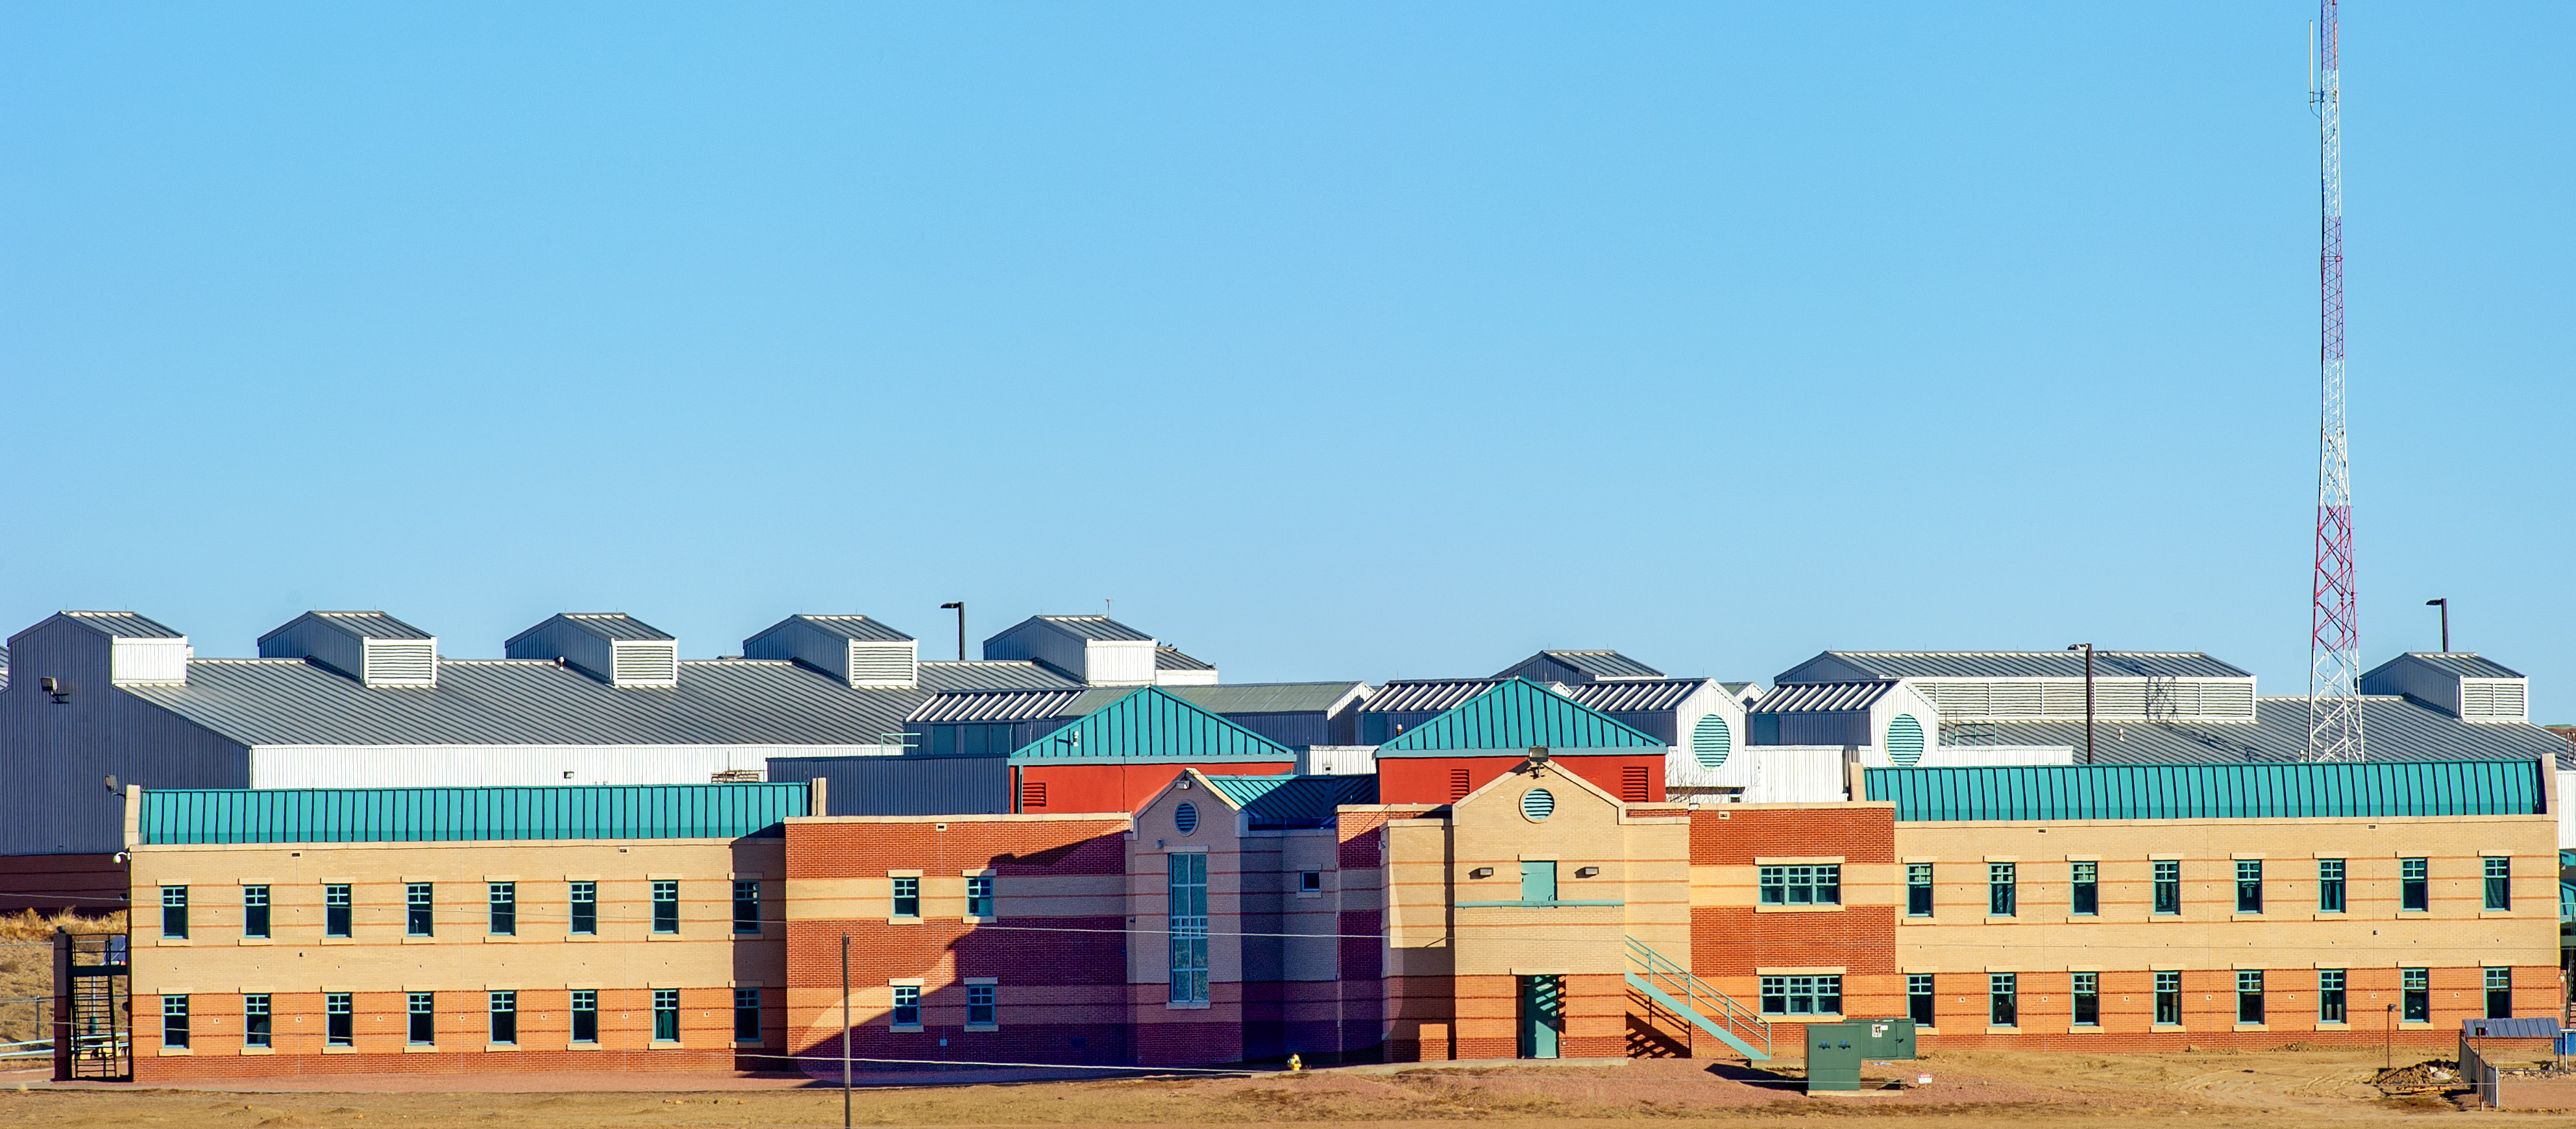 The Federal Correctional Complex, a large, modern brick and metal building with sections of blue roofs stands under a clear blue sky, featuring many windows and a tall communication tower to the right.